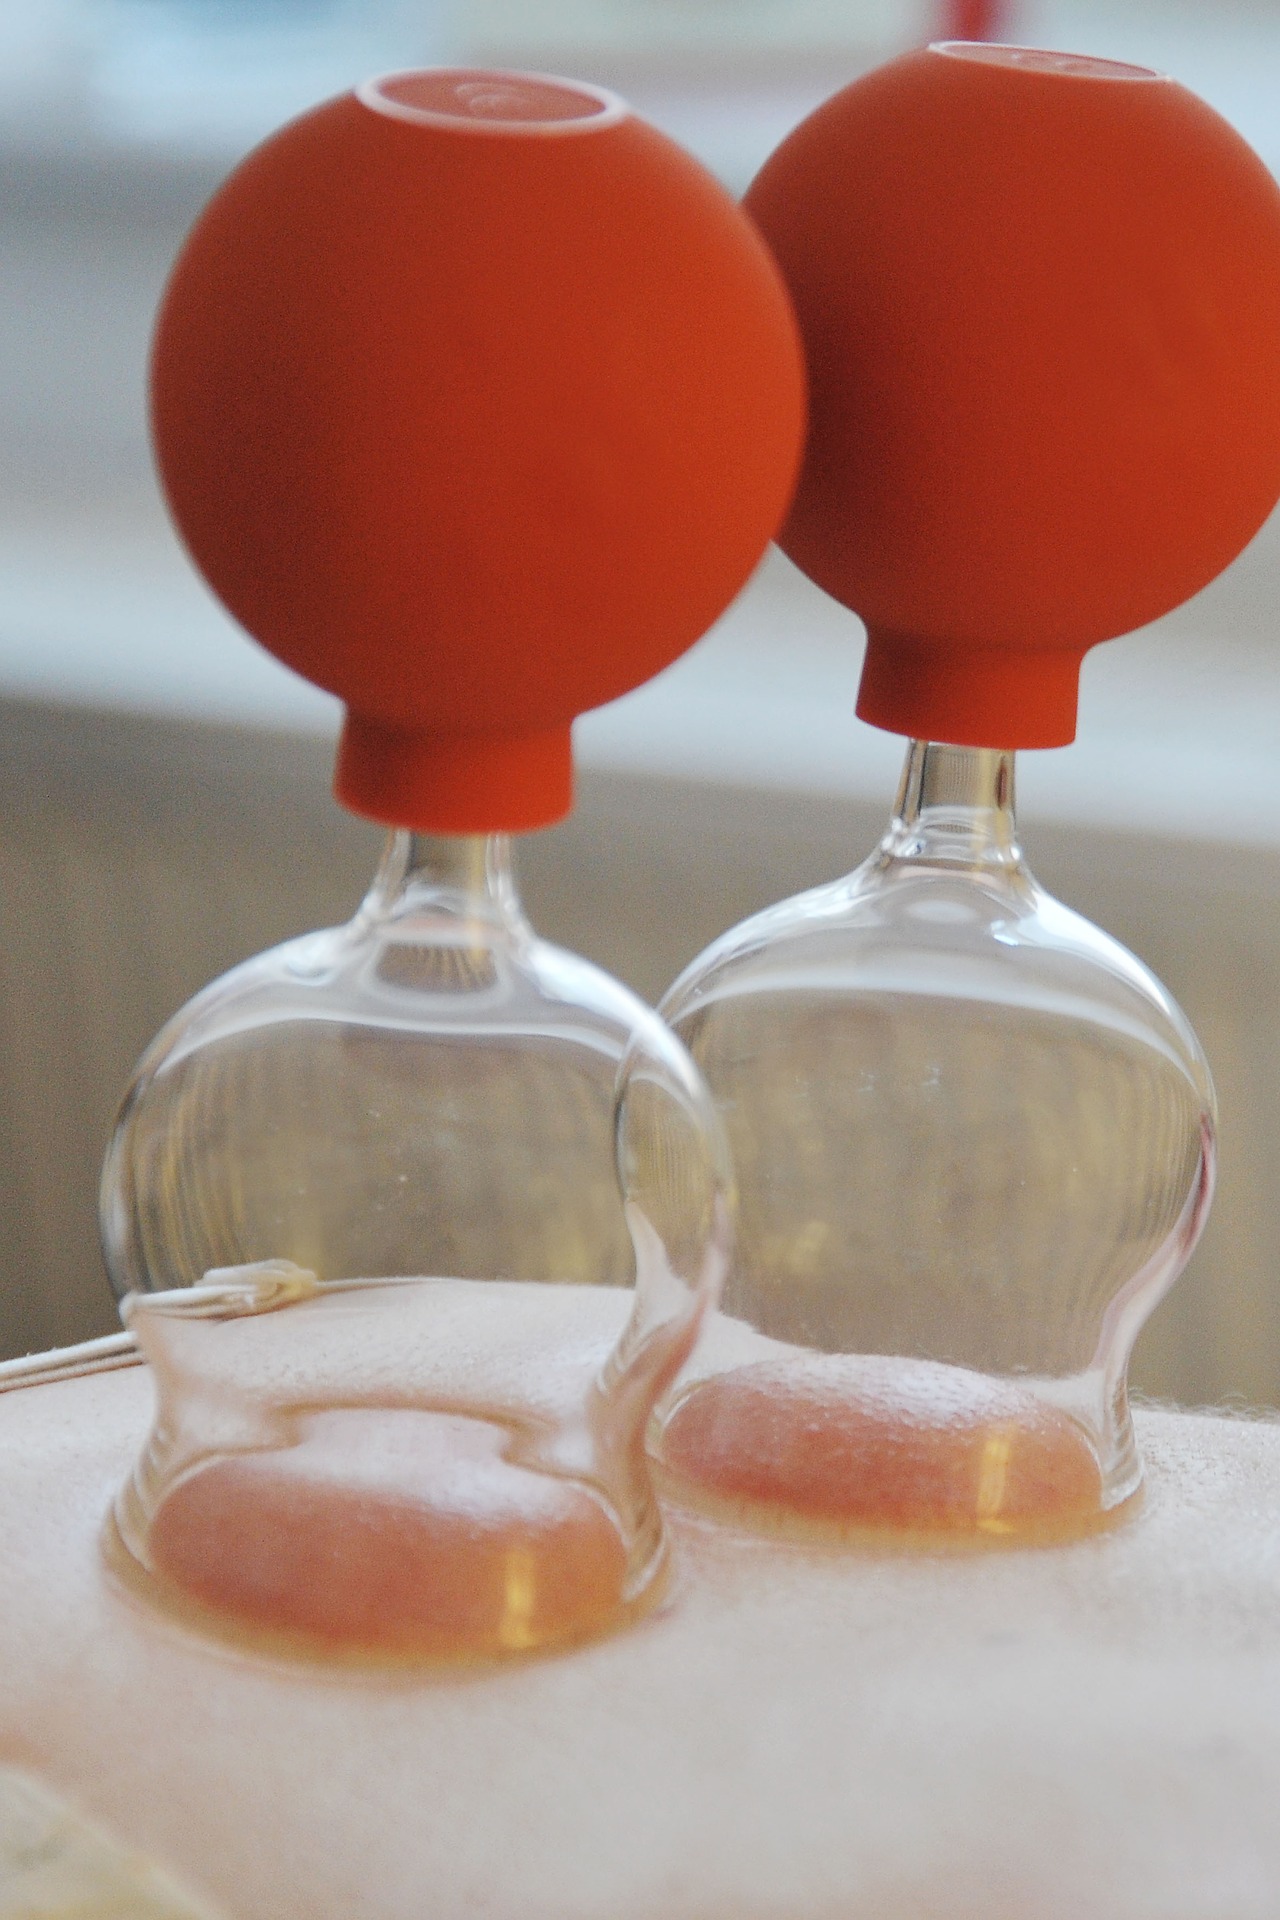 Cupping Therapy: A Sham or Not?